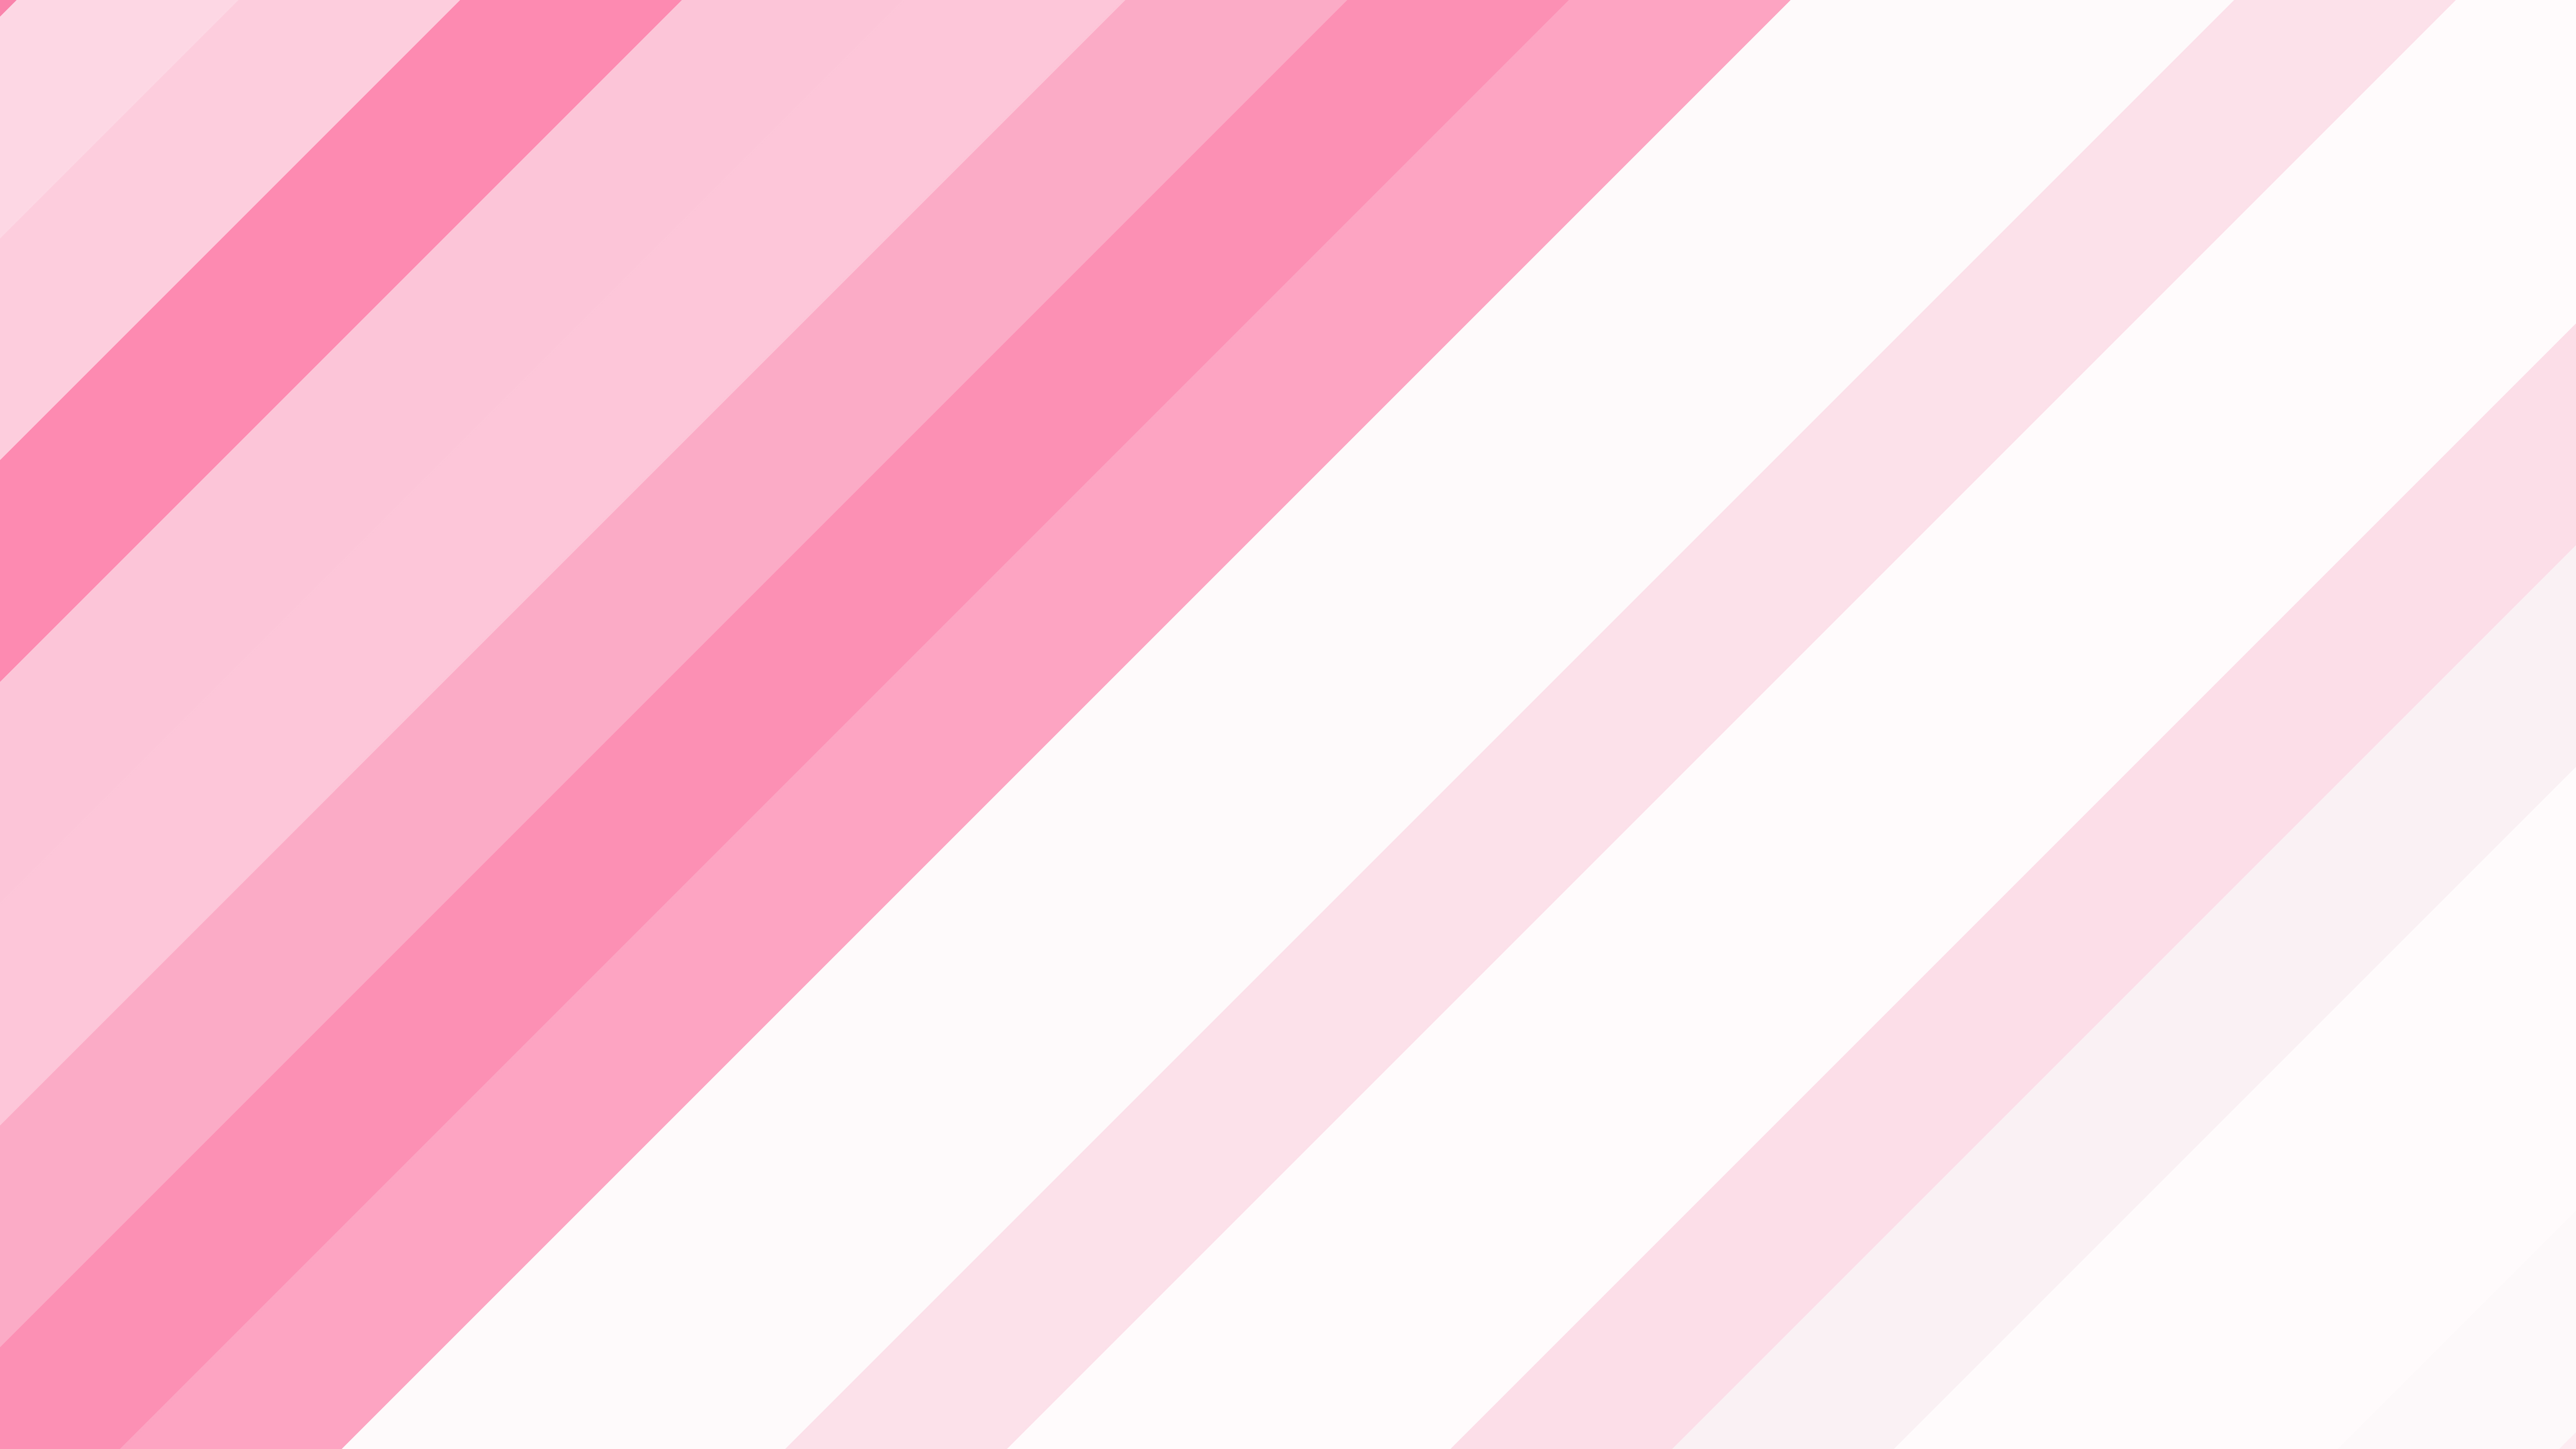 30 Seamless Pink Patterns for Free to Use